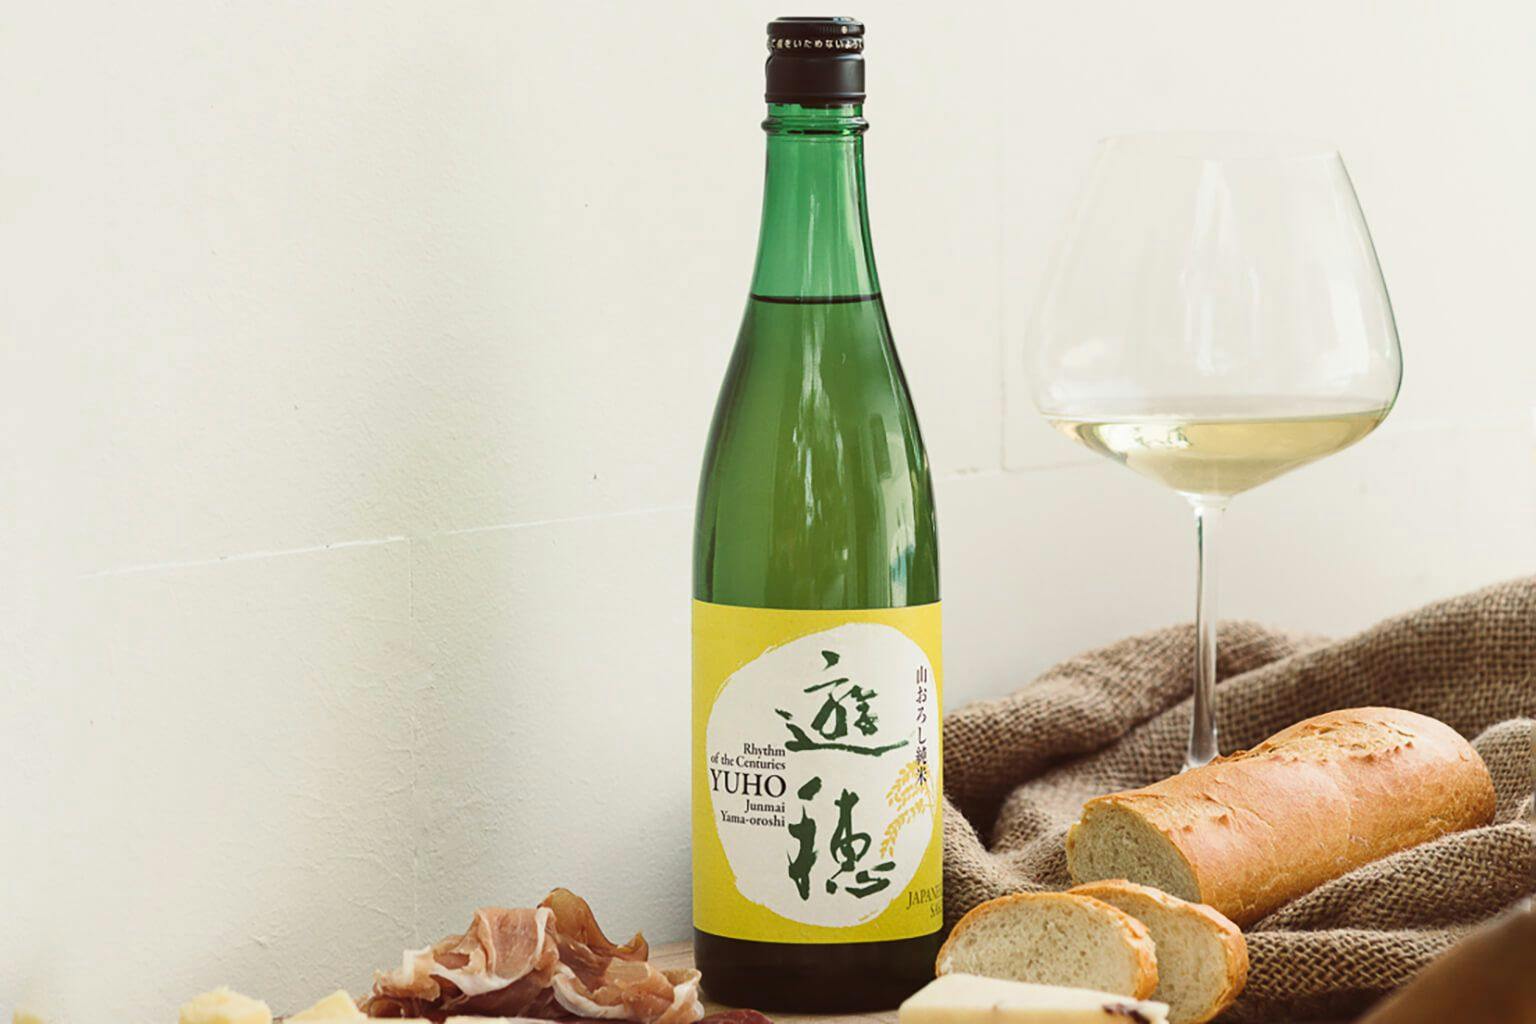 Koshu: Aged Sake Brands, History and How-To